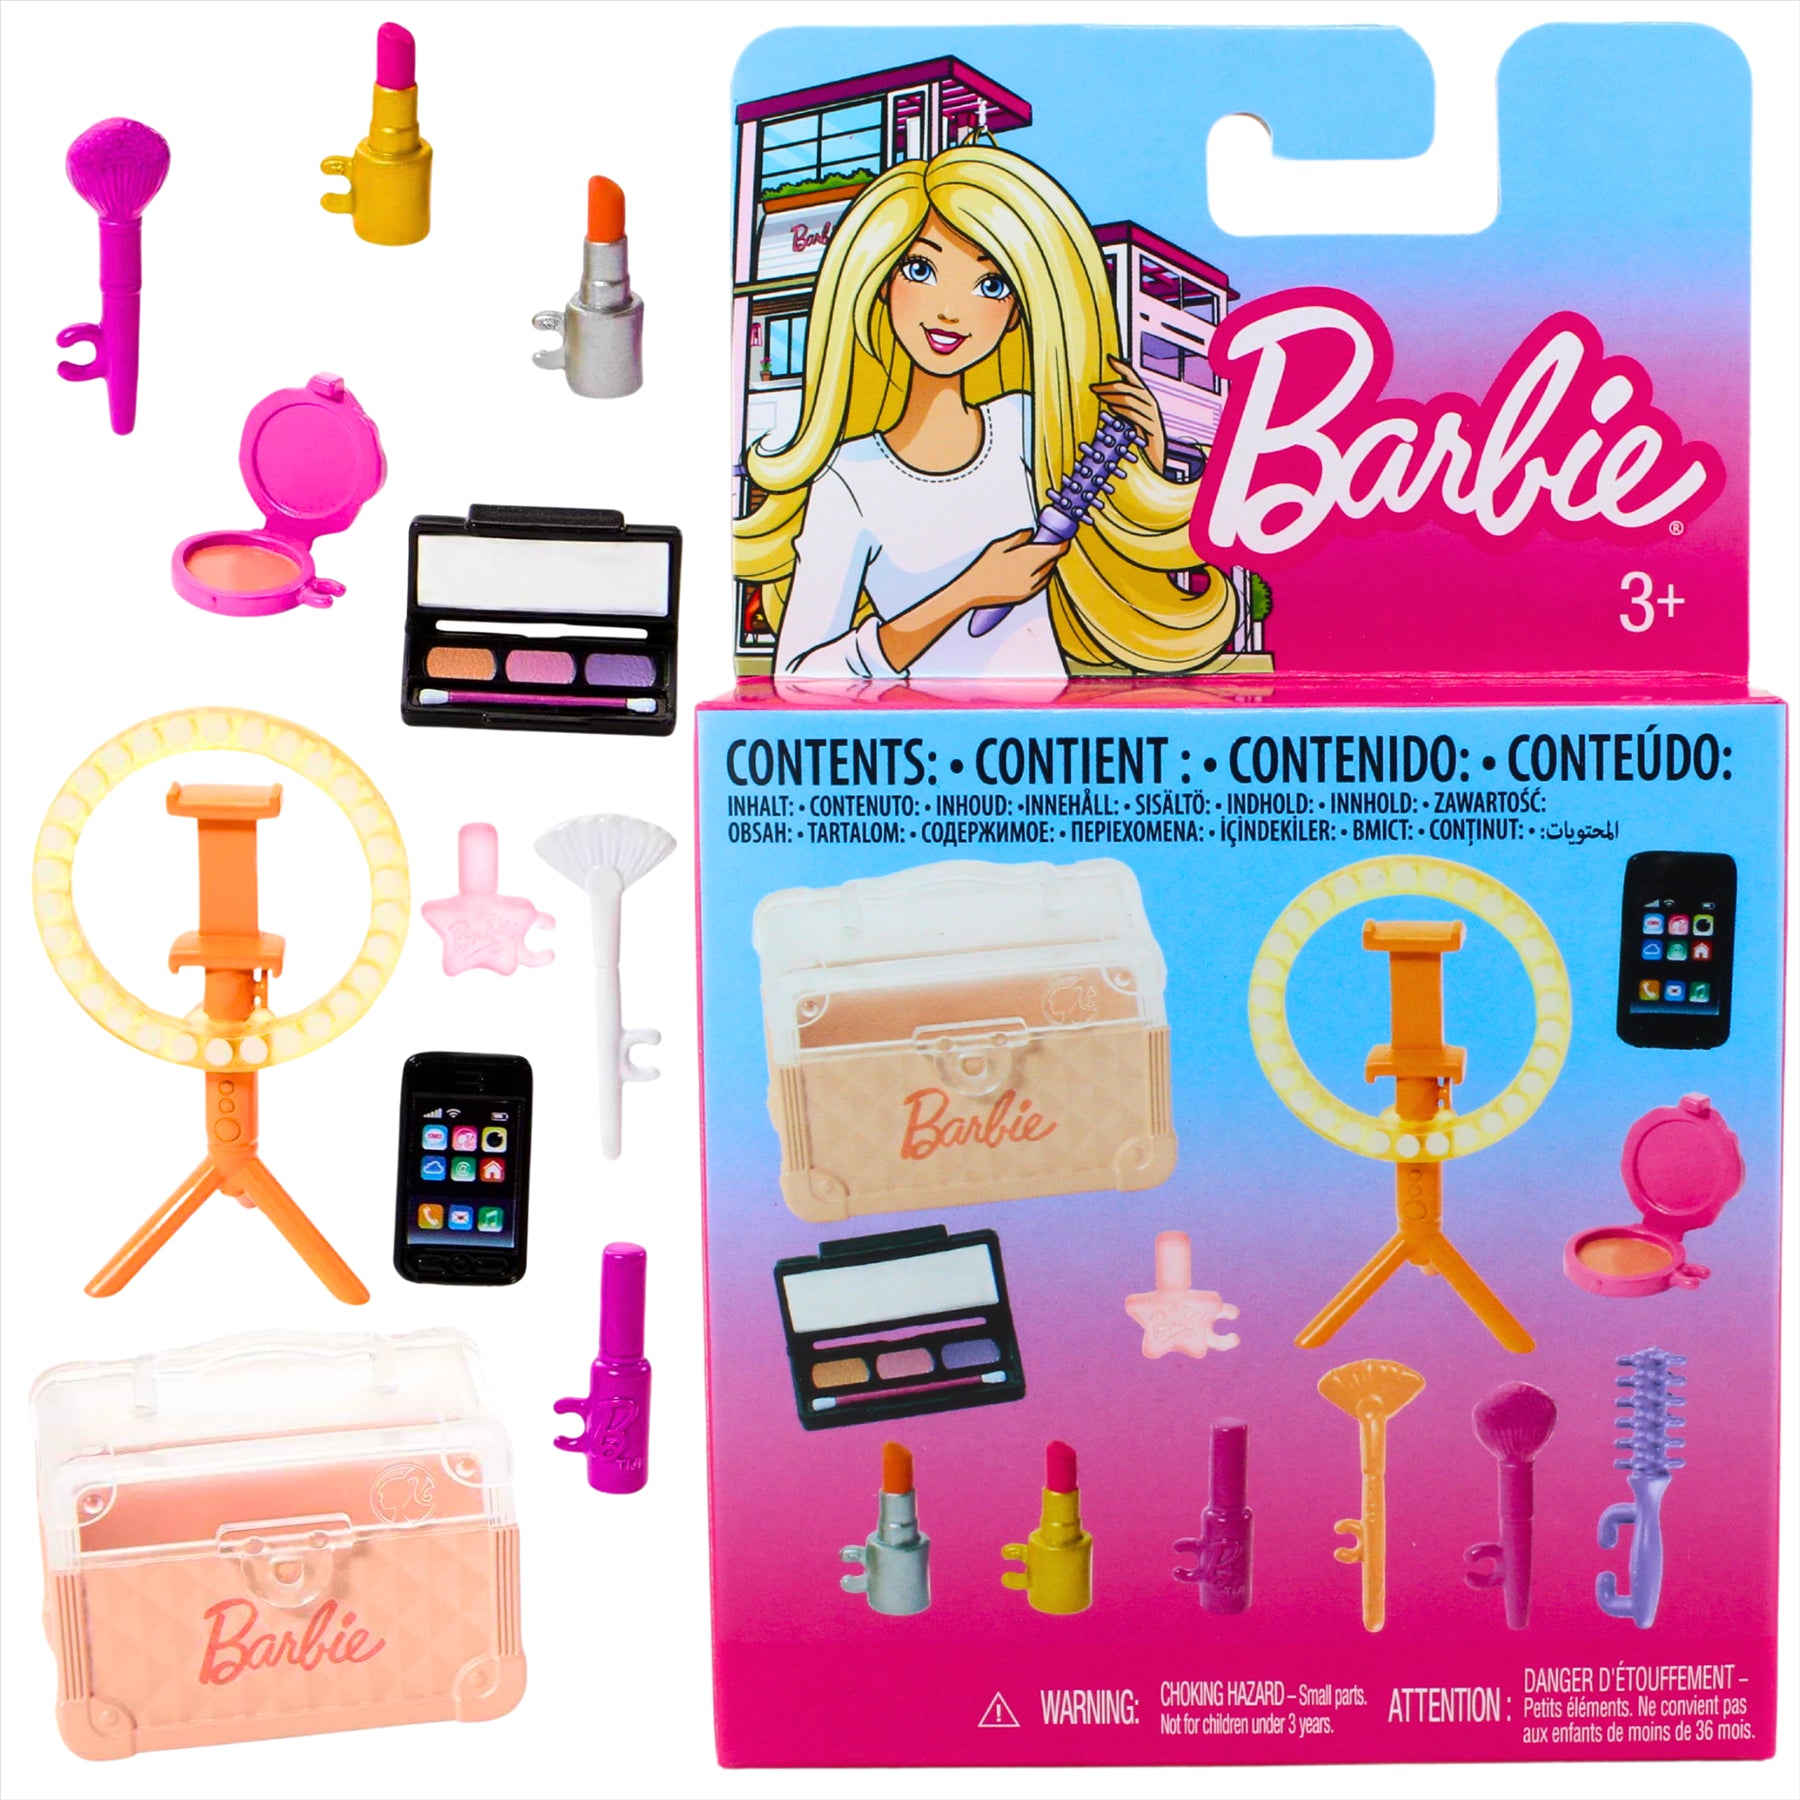 Barbie 12 Piece Doll and House Accessory Set with Make-Up and Phone - Toptoys2u